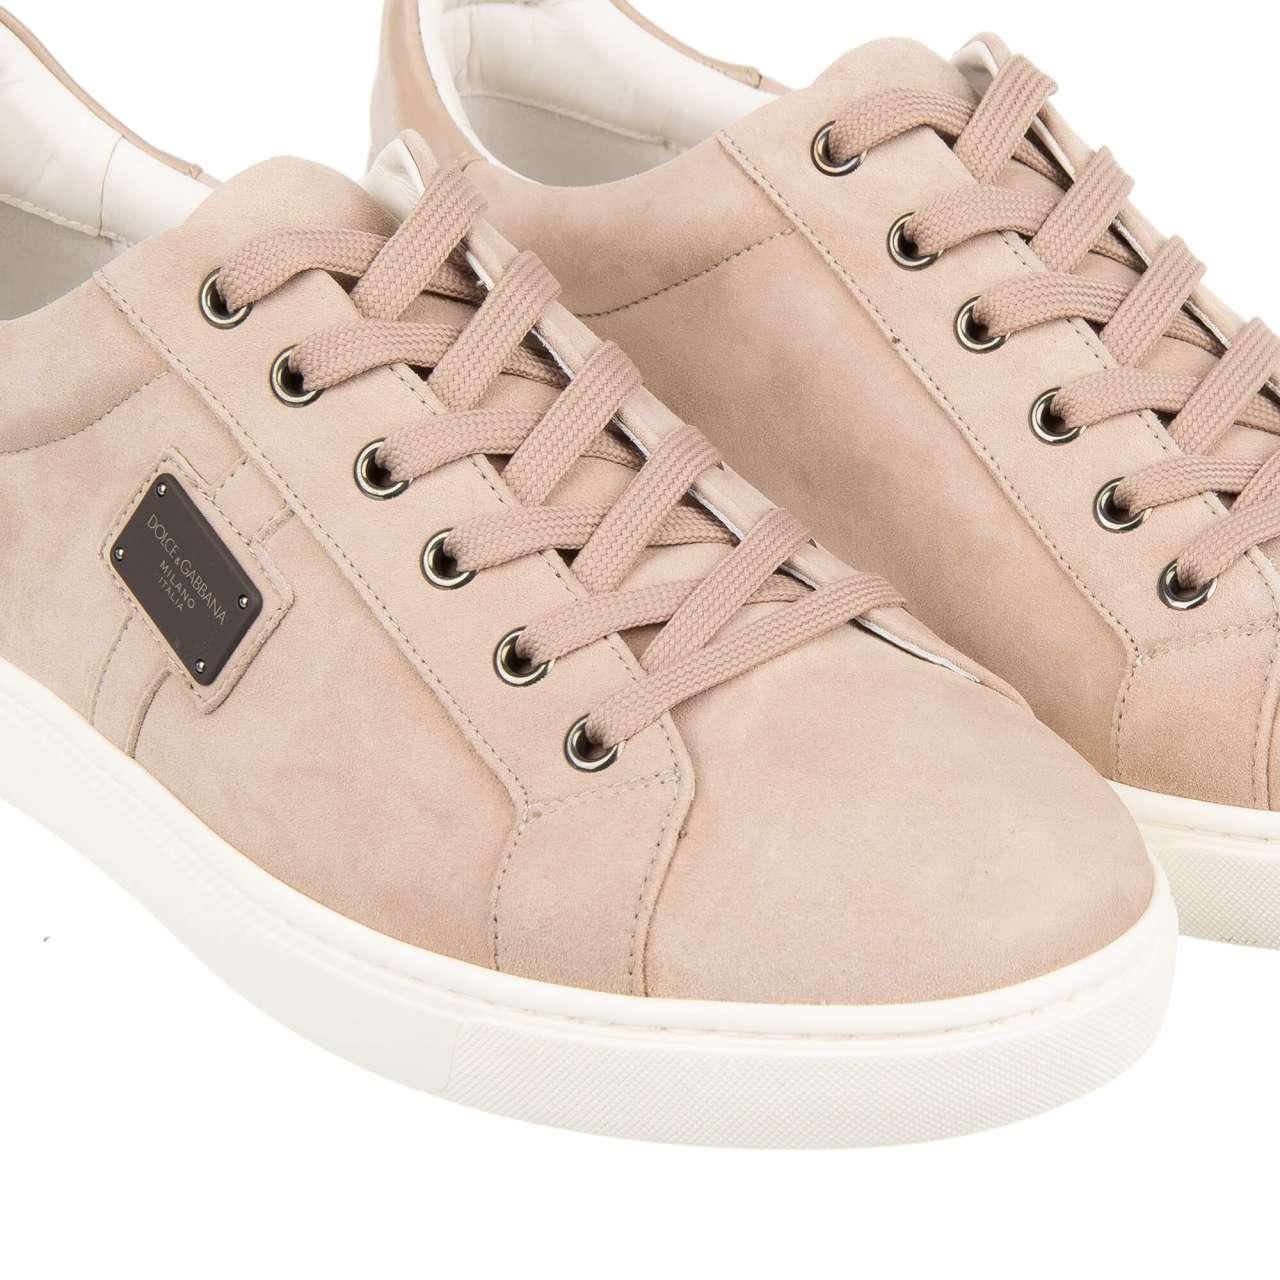 D&G Low-Top Suede Sneaker LONDON with DG Logo Plate Beige White 41 UK 7 US 8 For Sale 1